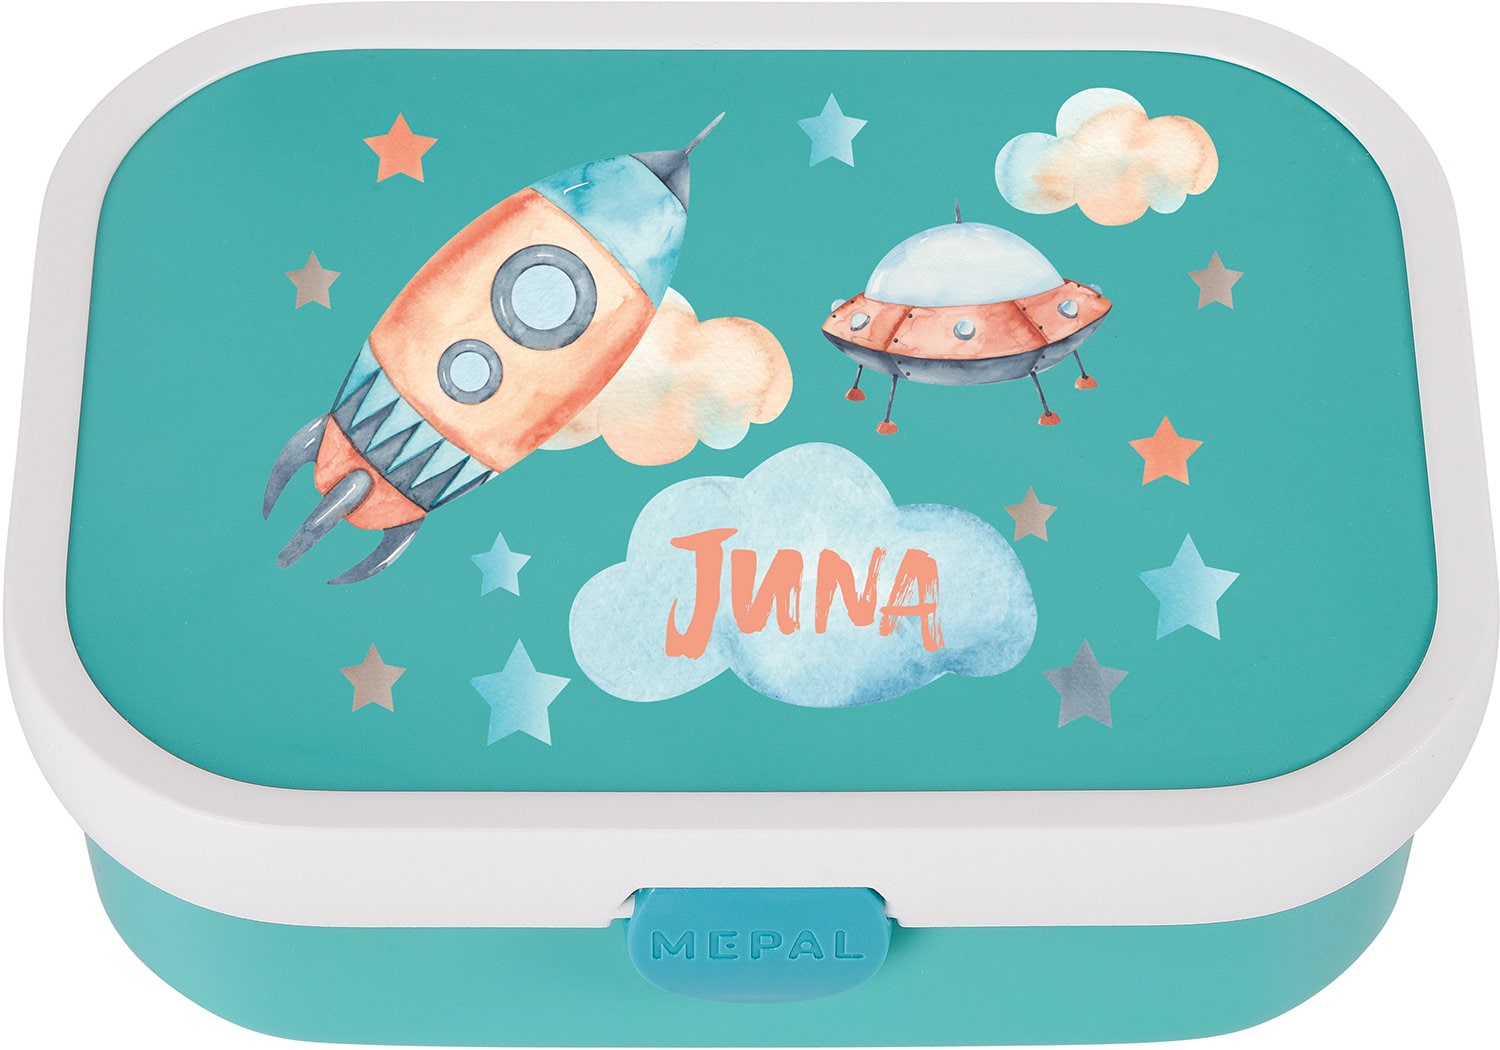 Mepal Lunch Box With Desired Name / Lunch Box With a Cute Ark for Daycare /  Kindergarten or School 